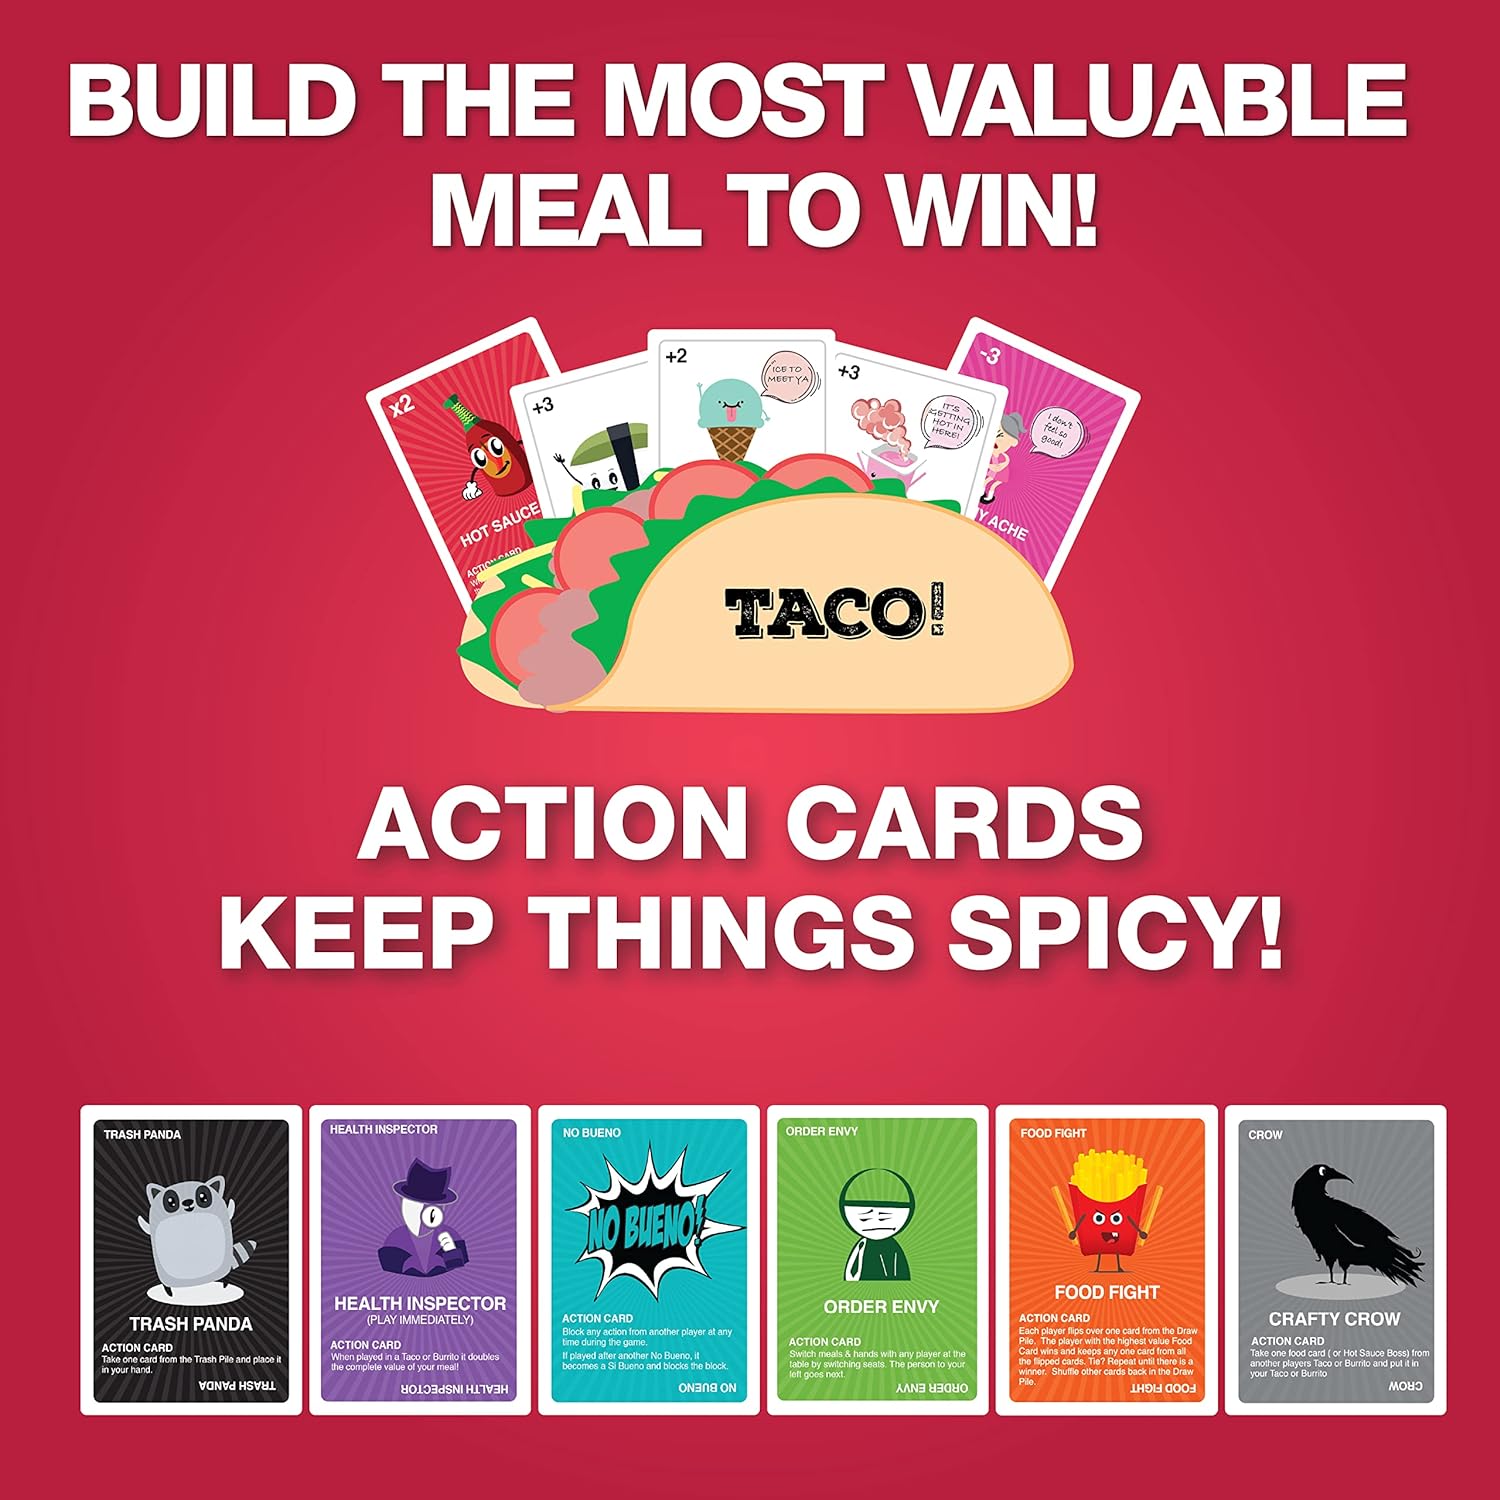 Taco vs Burrito Card Games and Board Games for Kids and Stocking Stuffer for Kids 6, 7, 8, 9, 10+ Adults - Great Kids Games and Family Games